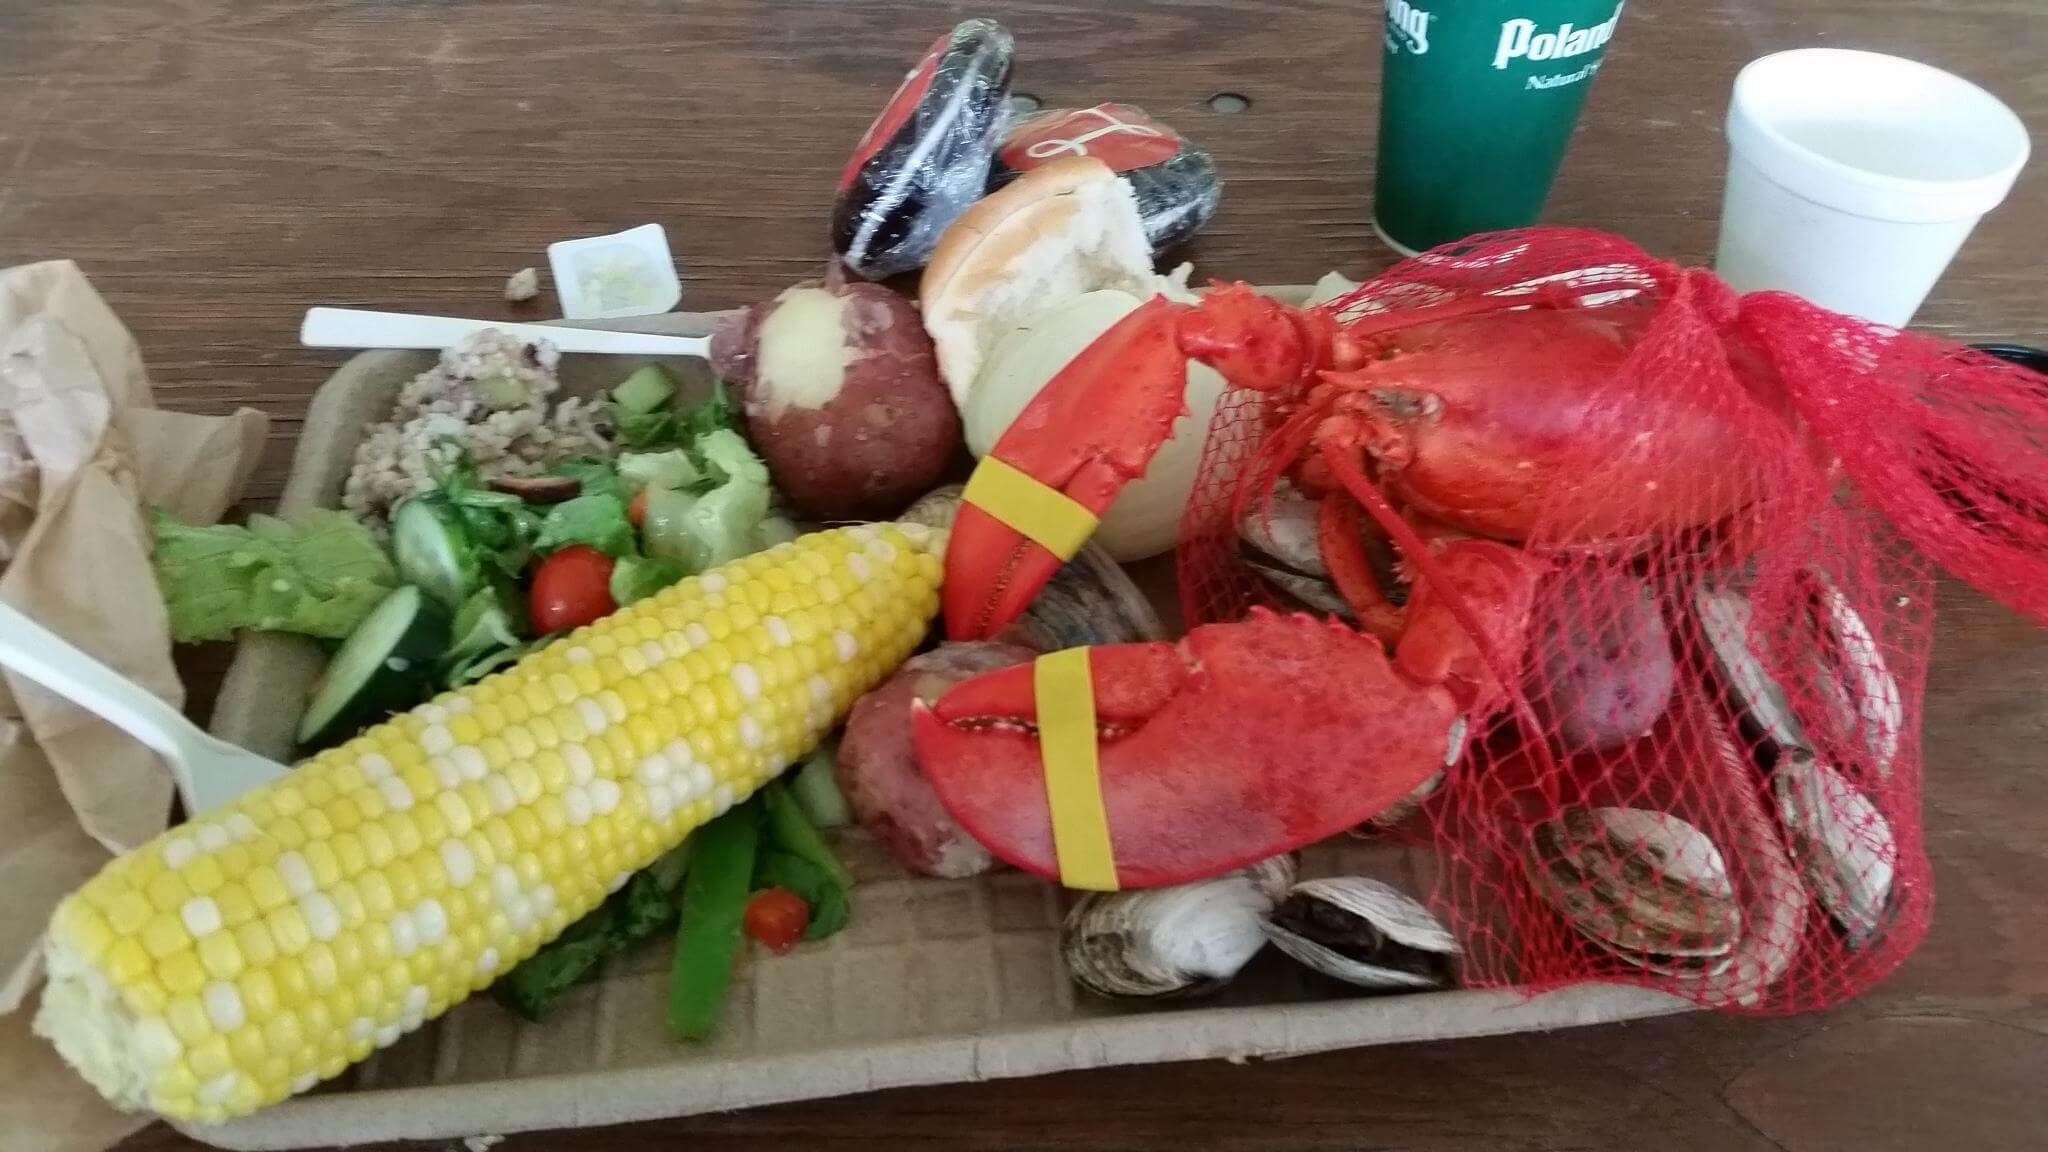  Lobster bake on Saturday night before the ride began